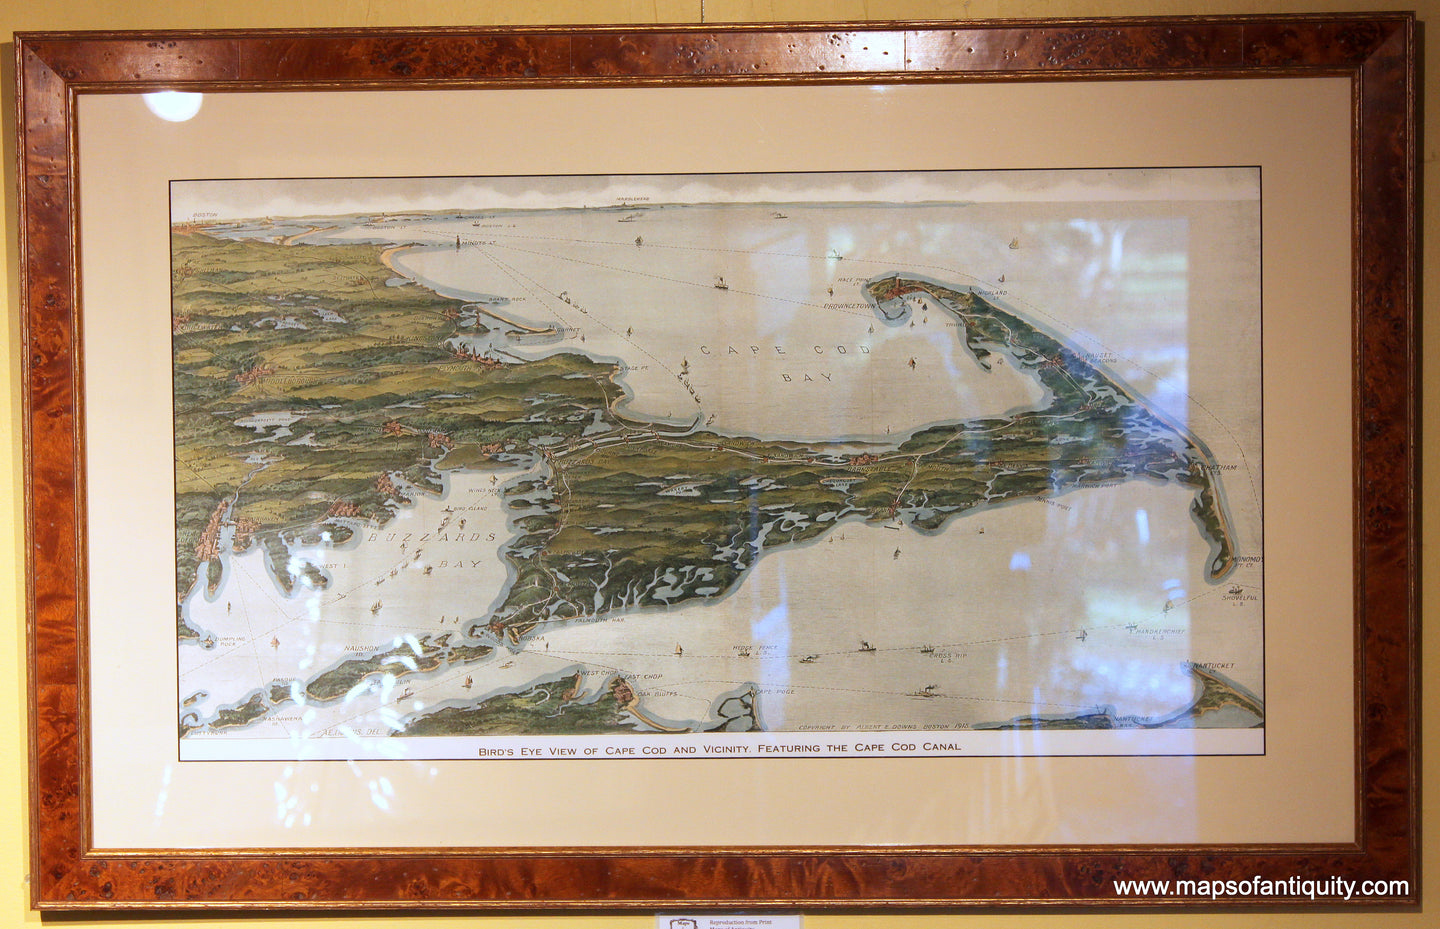 Framed-Reproduction-Cape-Cod-Bird's-Eye-View-Framed-Hand-Colored-Reproduction-Framed-Reproduction-Cape-Cod-and-Islands-Reproduction-Downs-Maps-Of-Antiquity